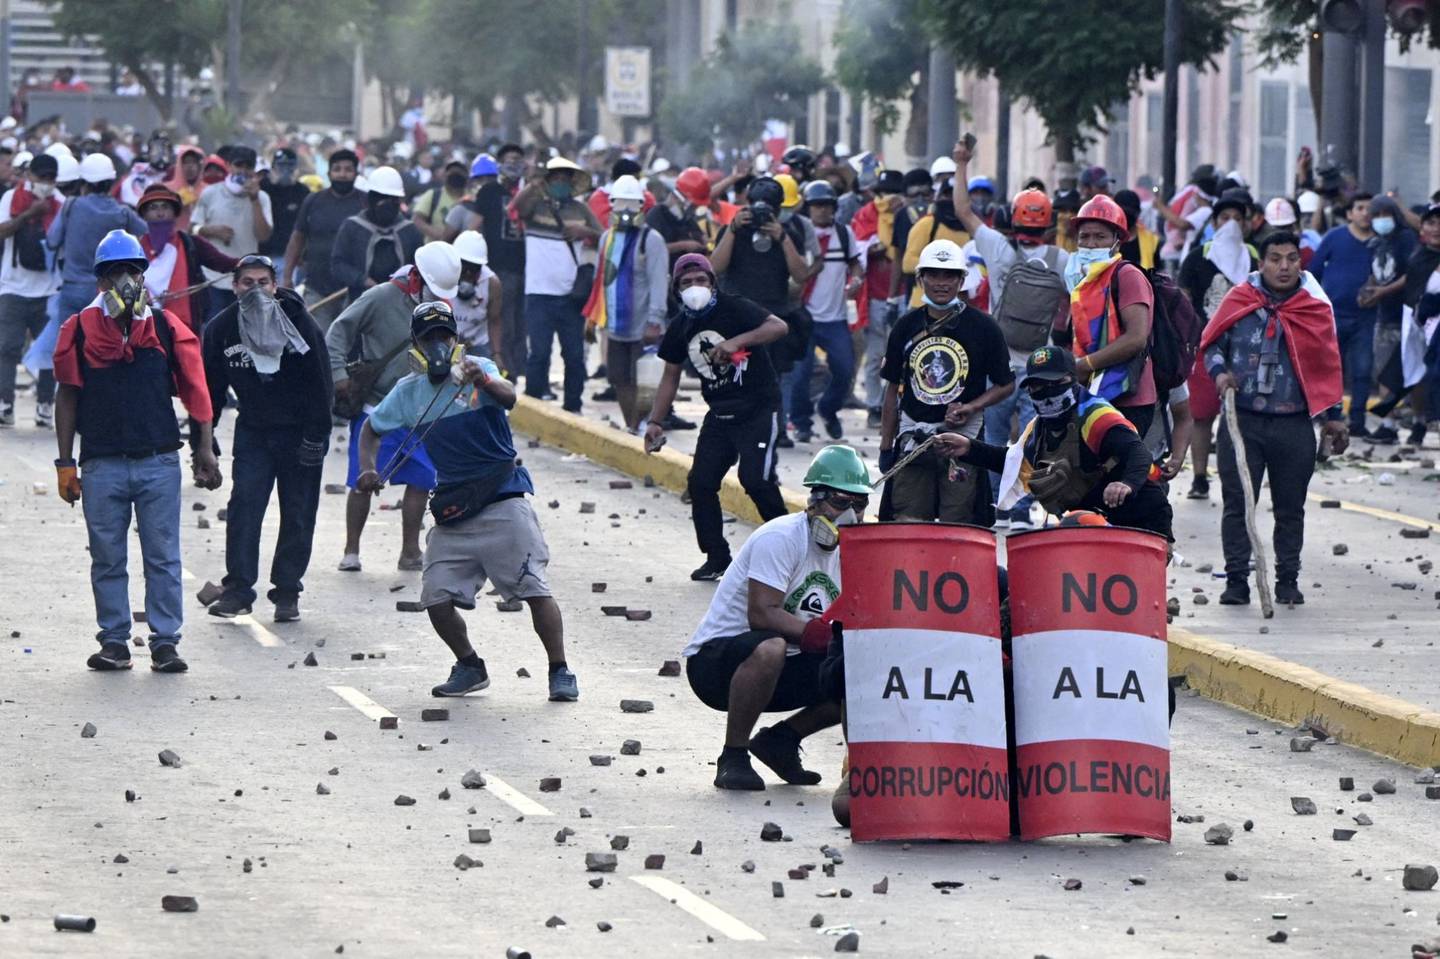 Demonstrators and the riot police during clashes in Lima on Jan. 24.